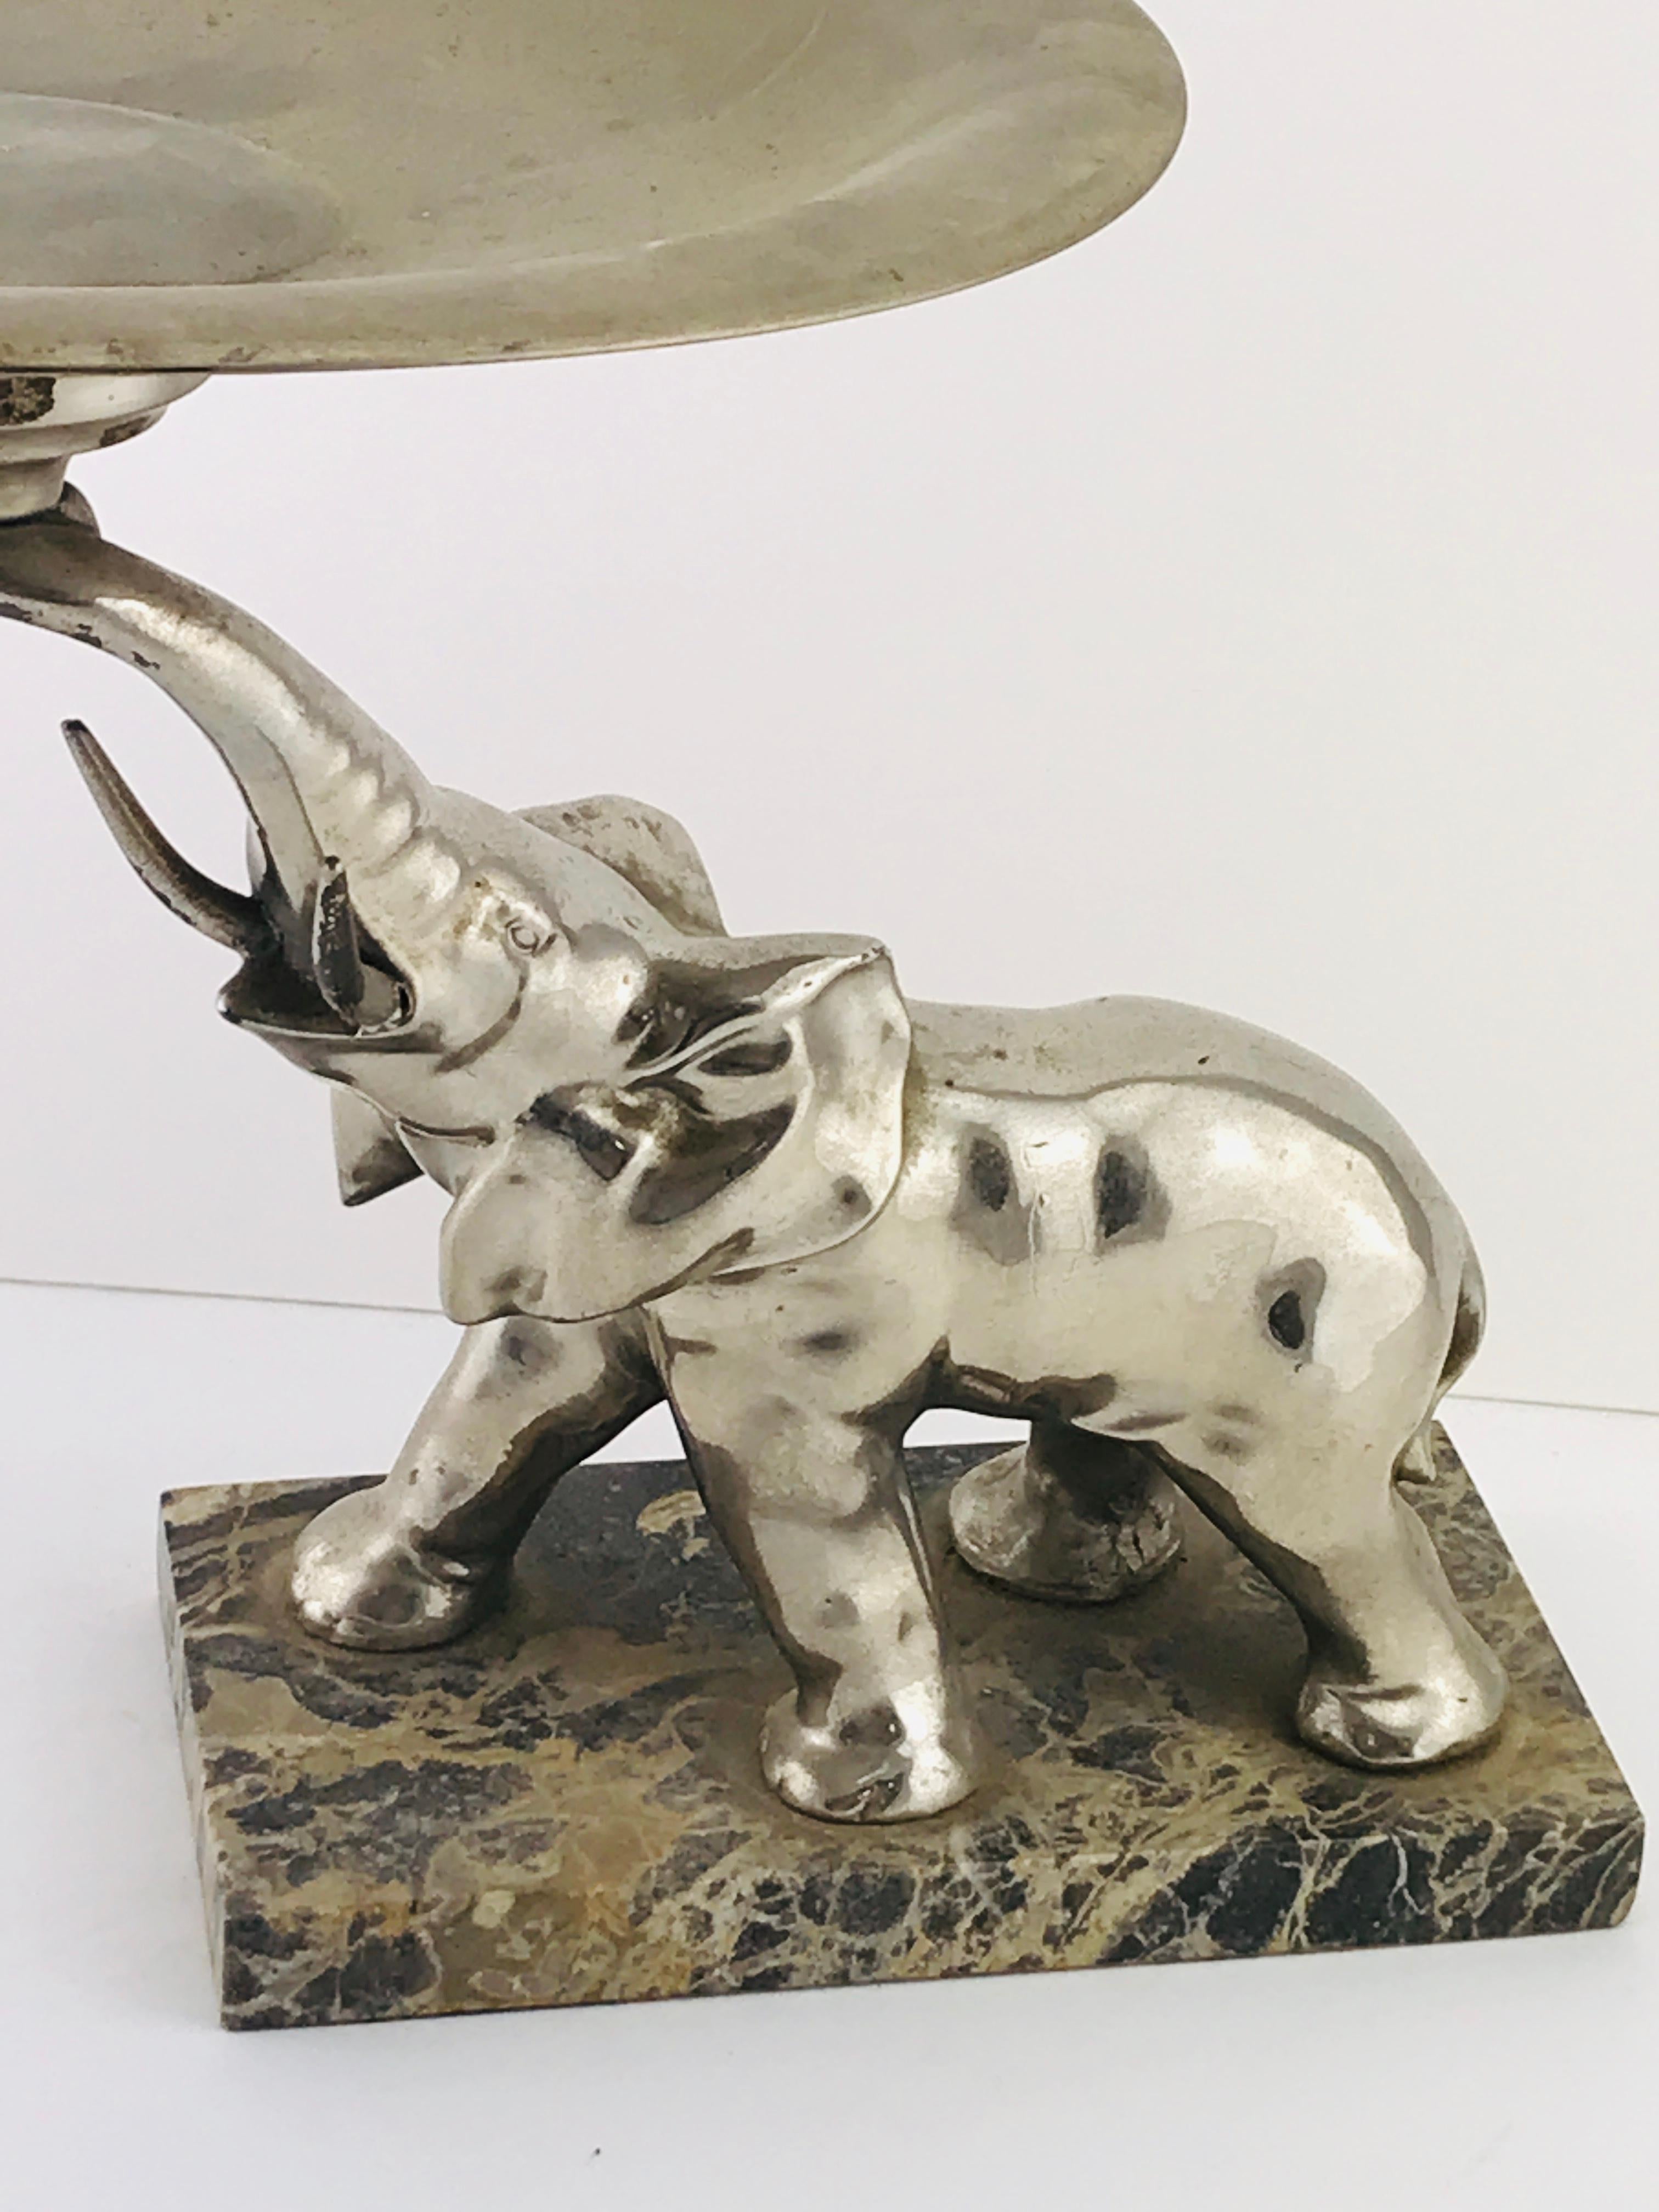 Sculpture of elephant silver plated and marble base, also can be used as holder for things like jewellery or keys, perfect for a sideboard or as decorative object.
  